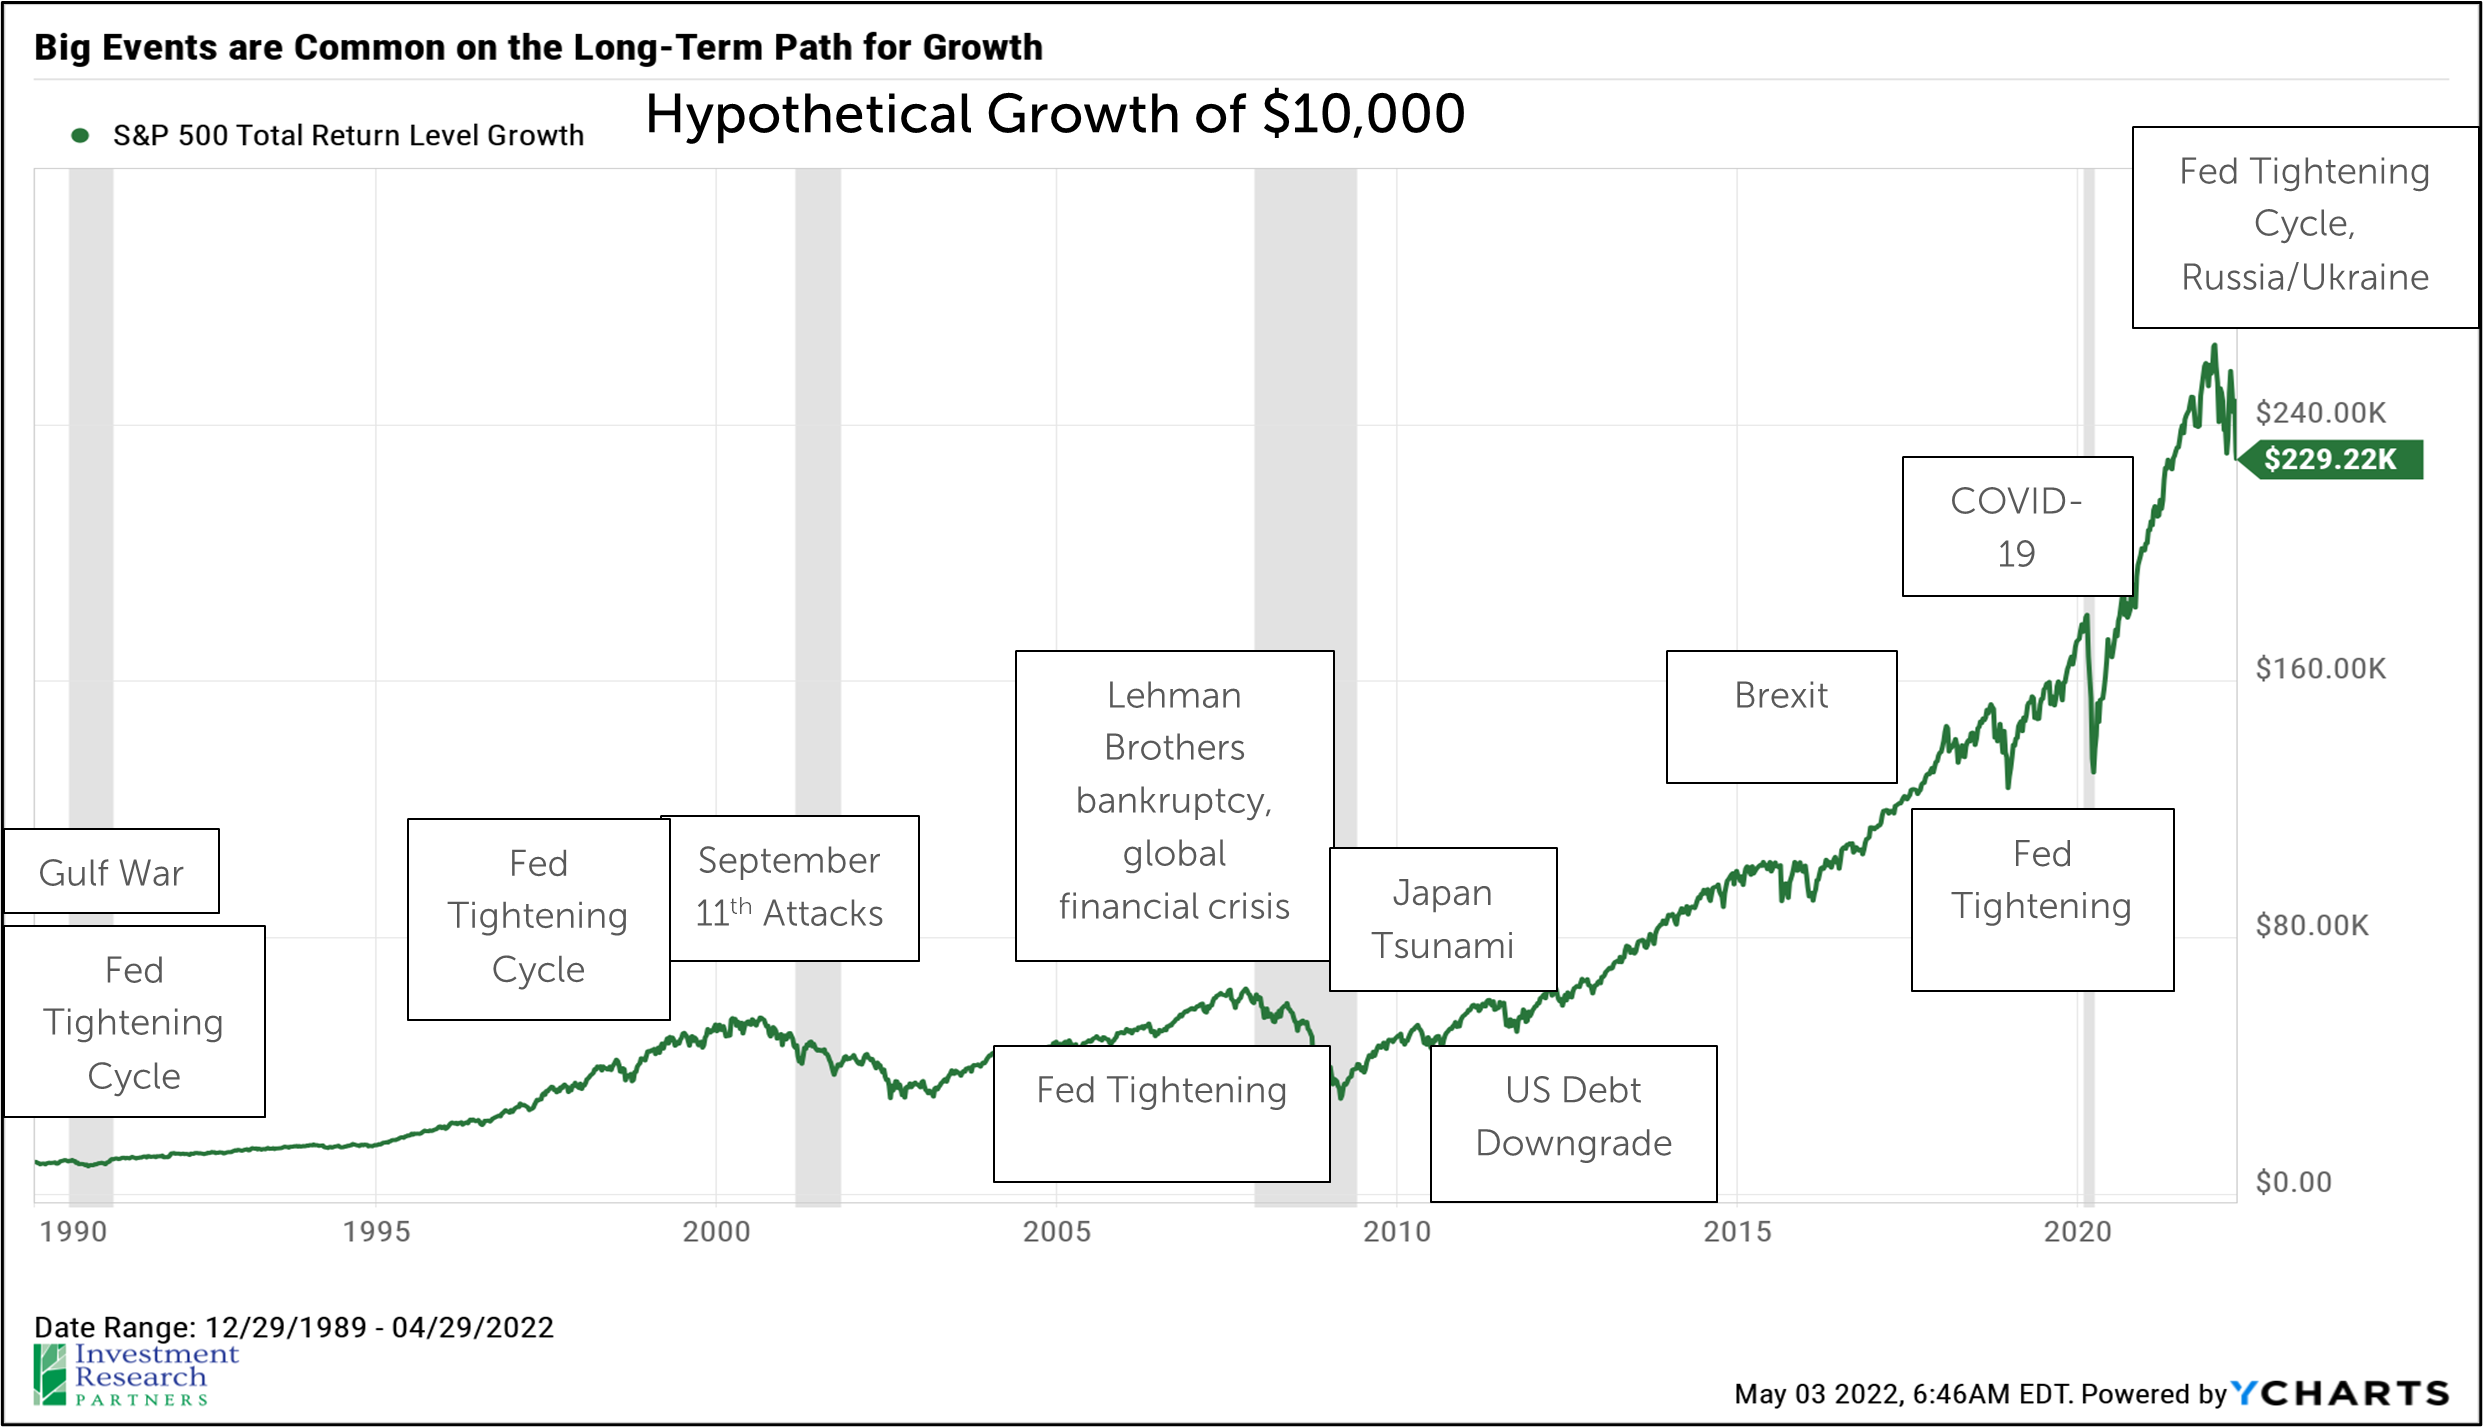 Line graphs depicting Big Events are Common on the Long-Term Path for Growth